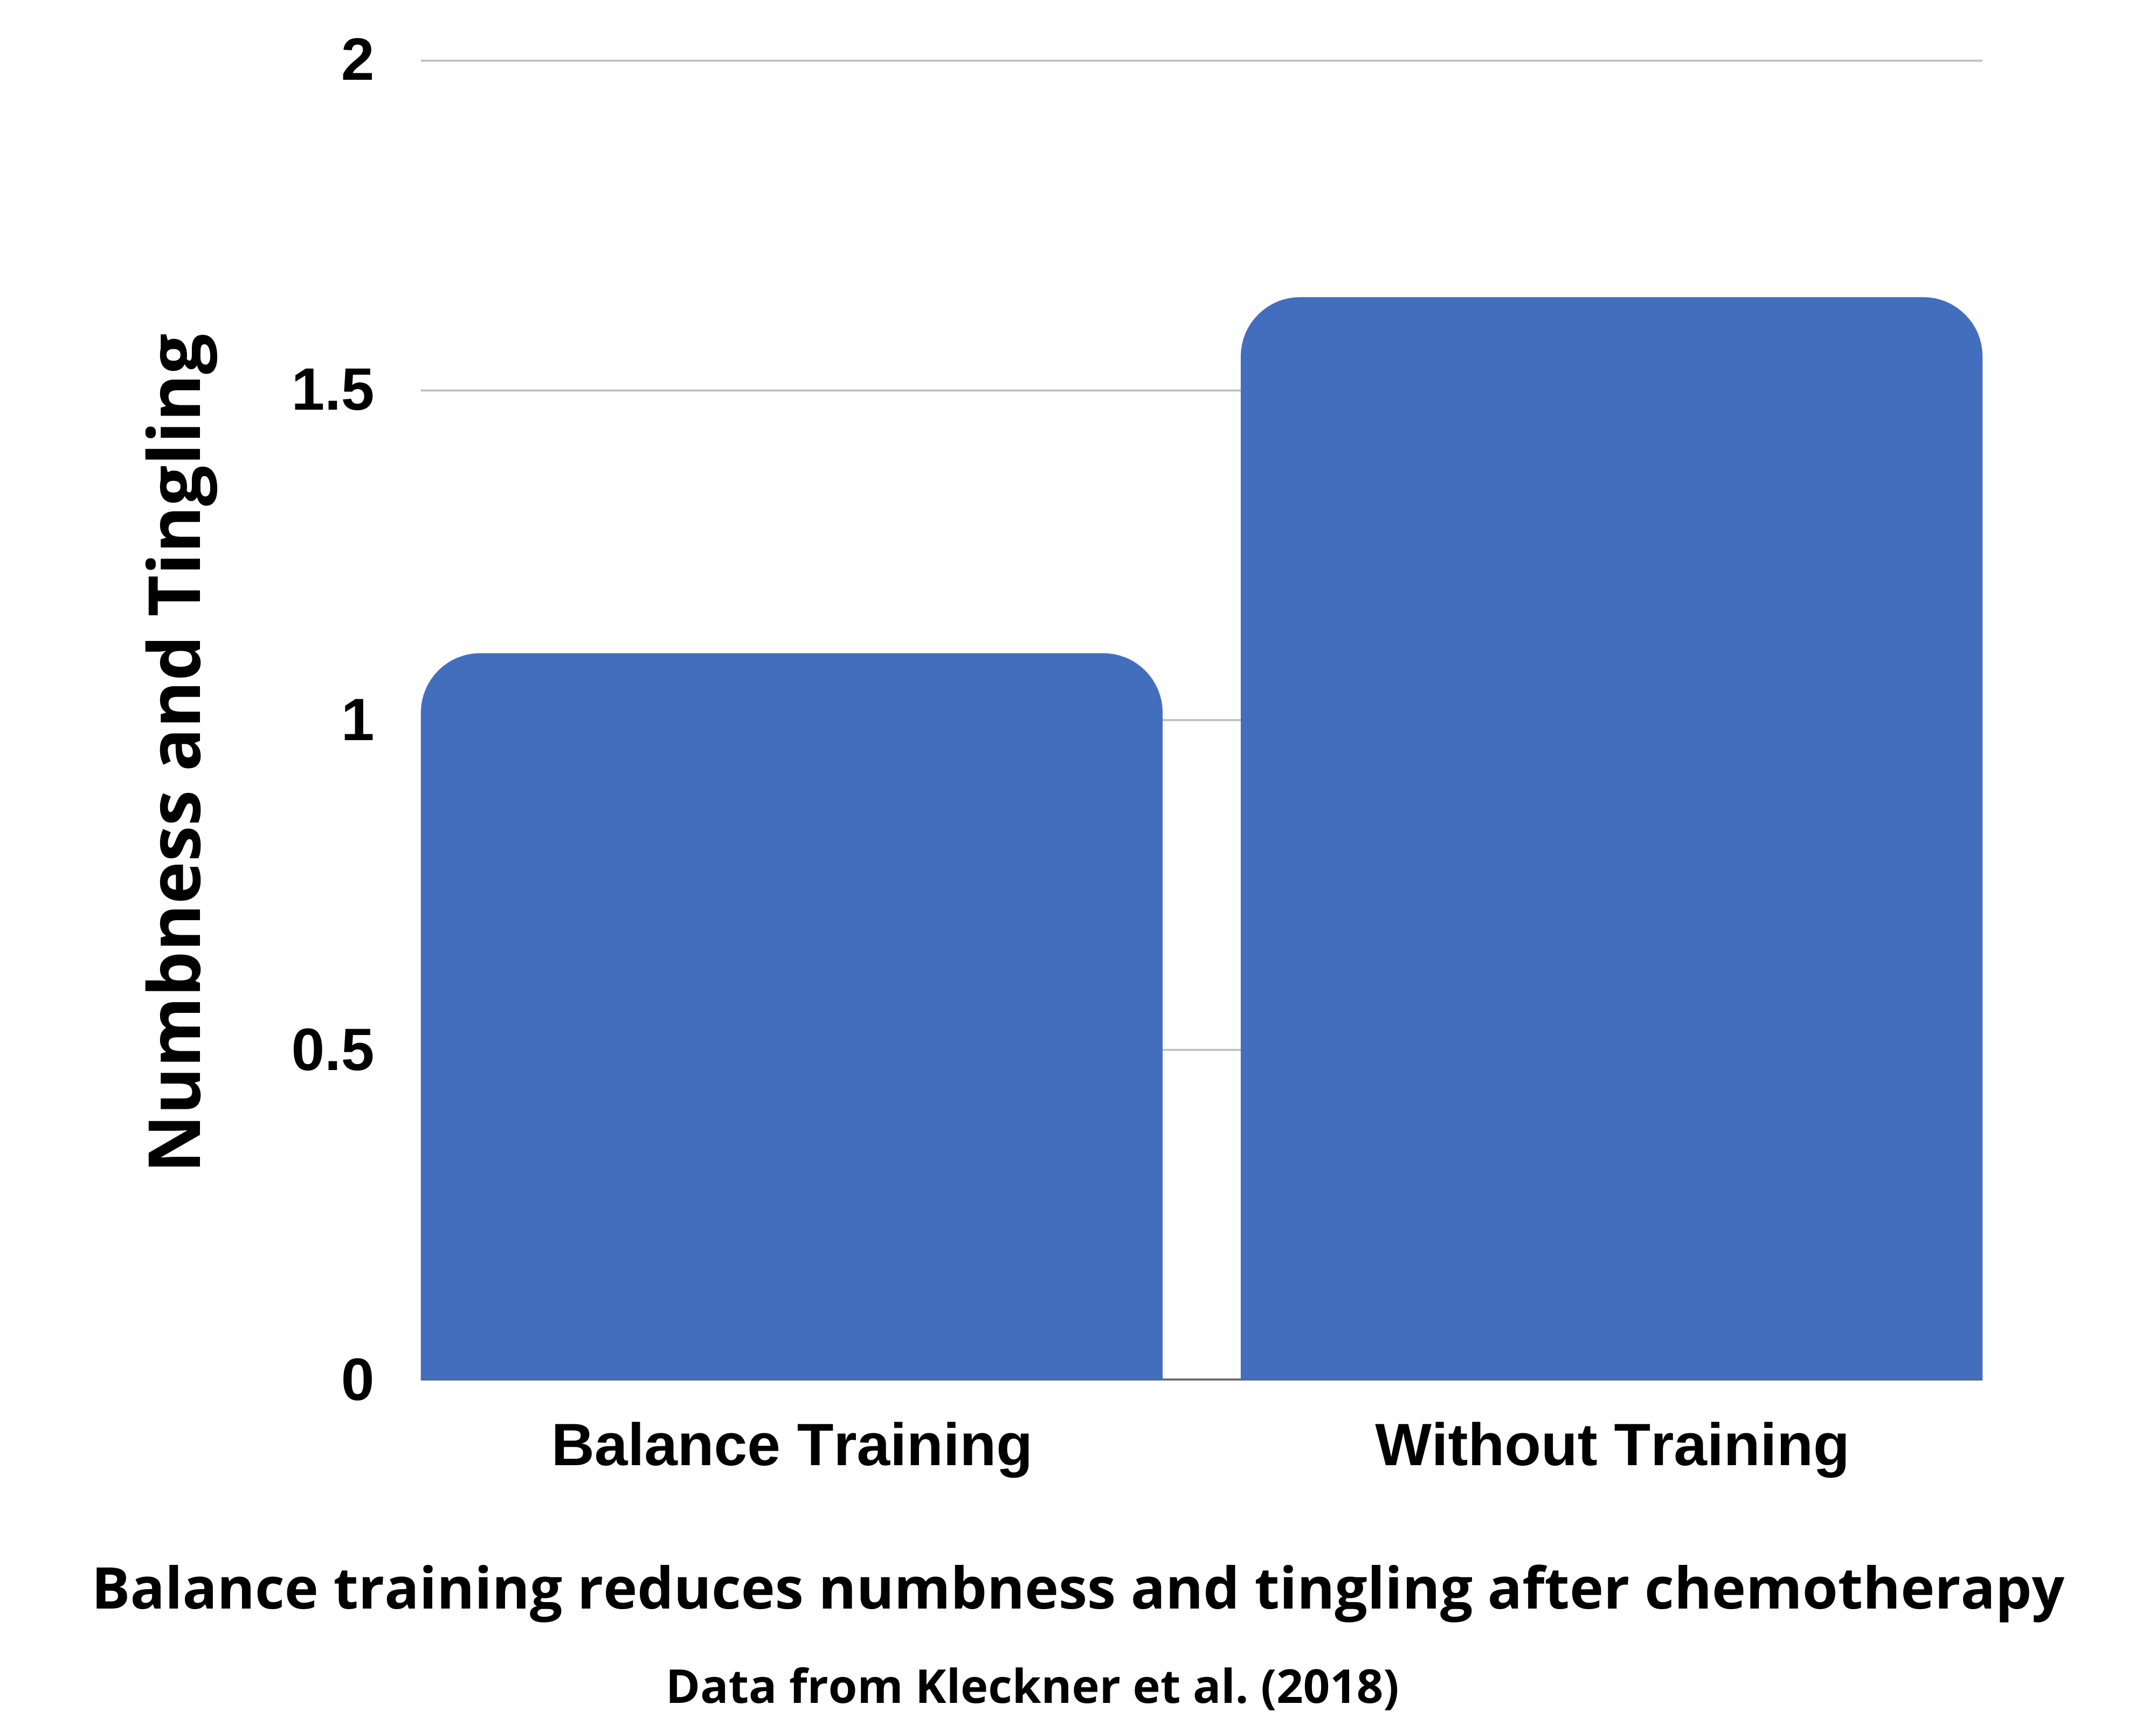 Numbness and tingling improve with balance training